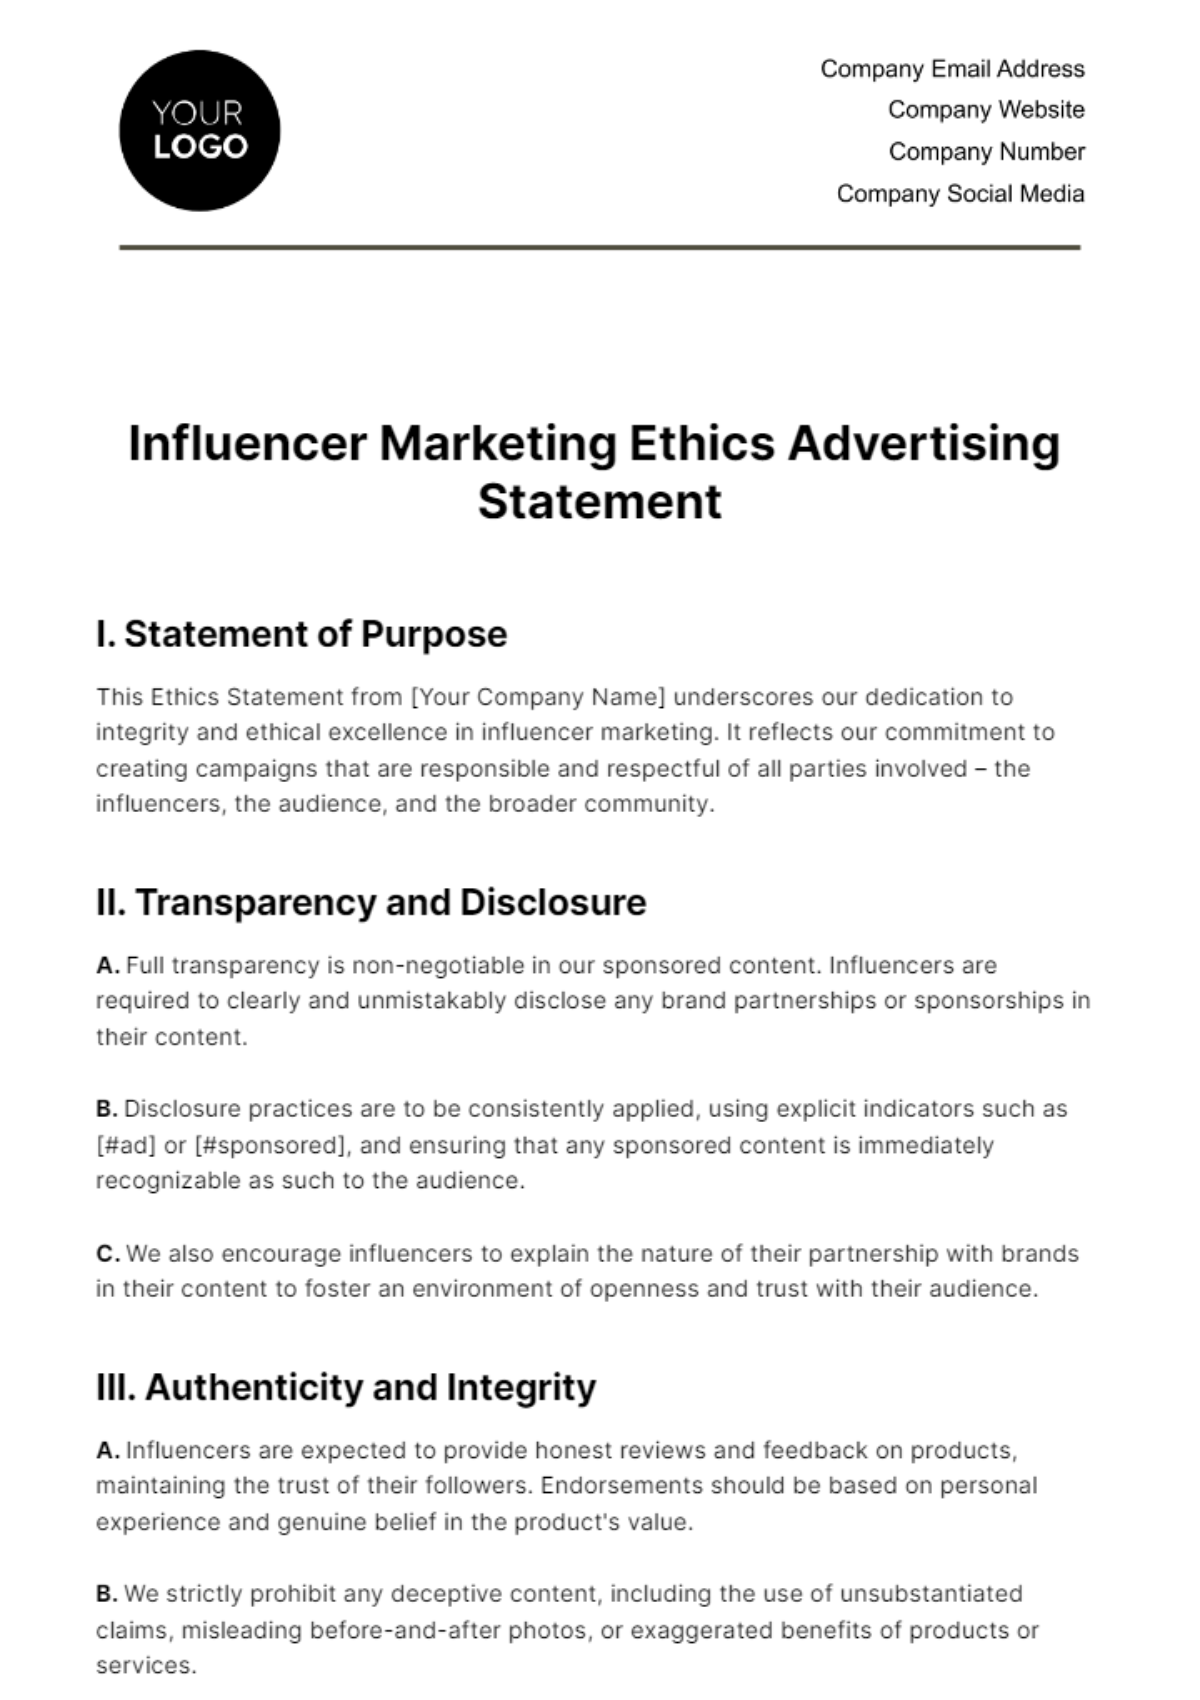 Free Influencer Marketing Ethics Advertising Statement Template